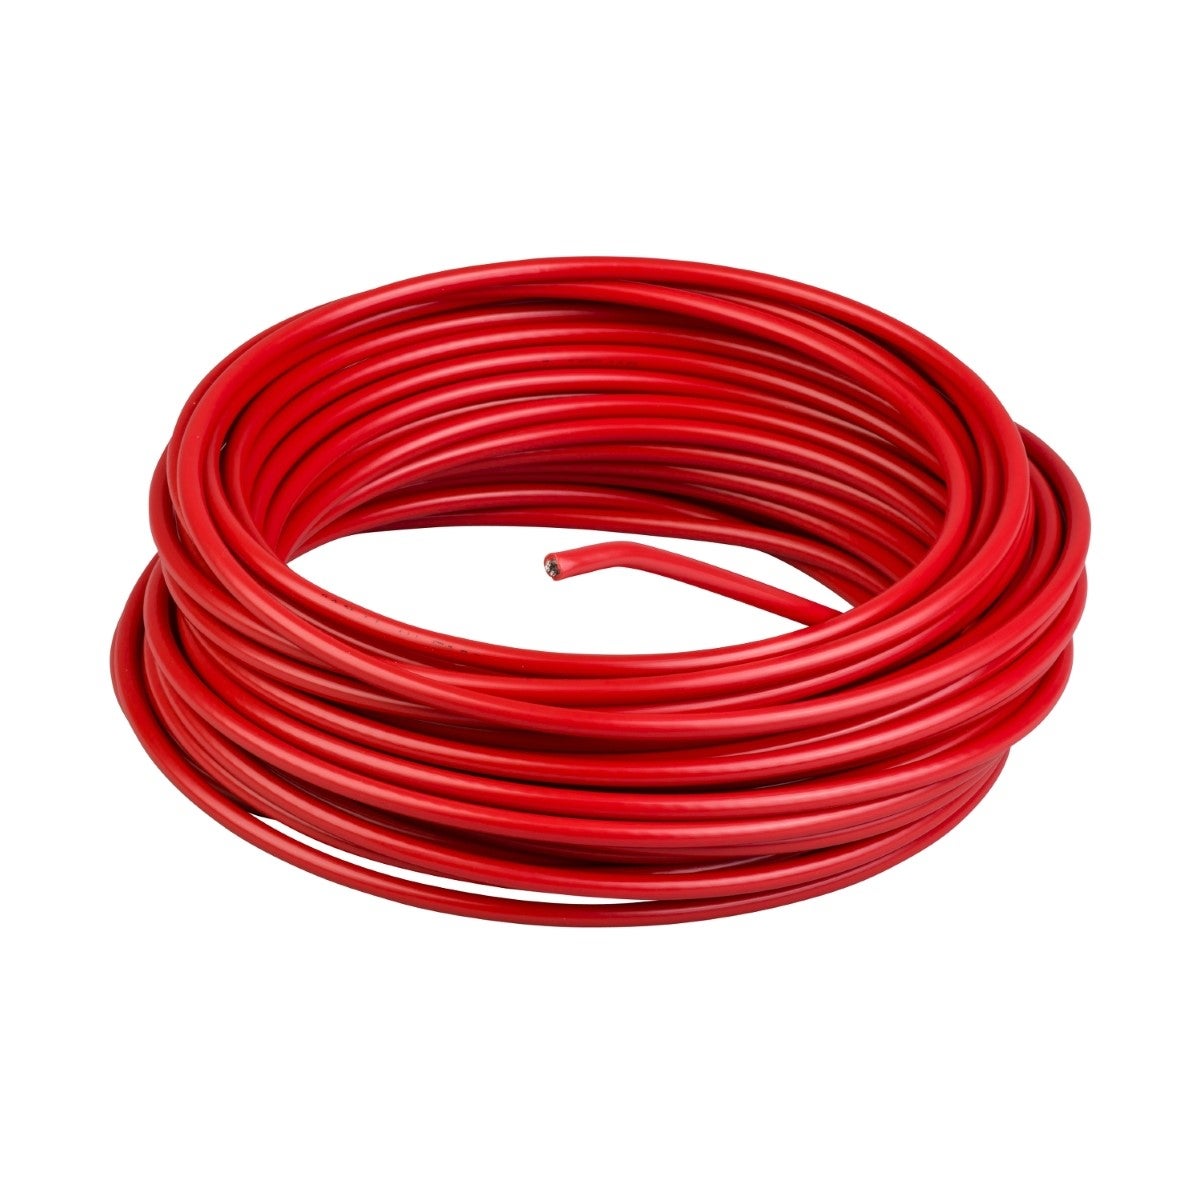 Telemecanique Emergency stop rope pull switches XY2C, red galvanised cable, Ø 3.2 mm, L 100.5 m, for XY2C